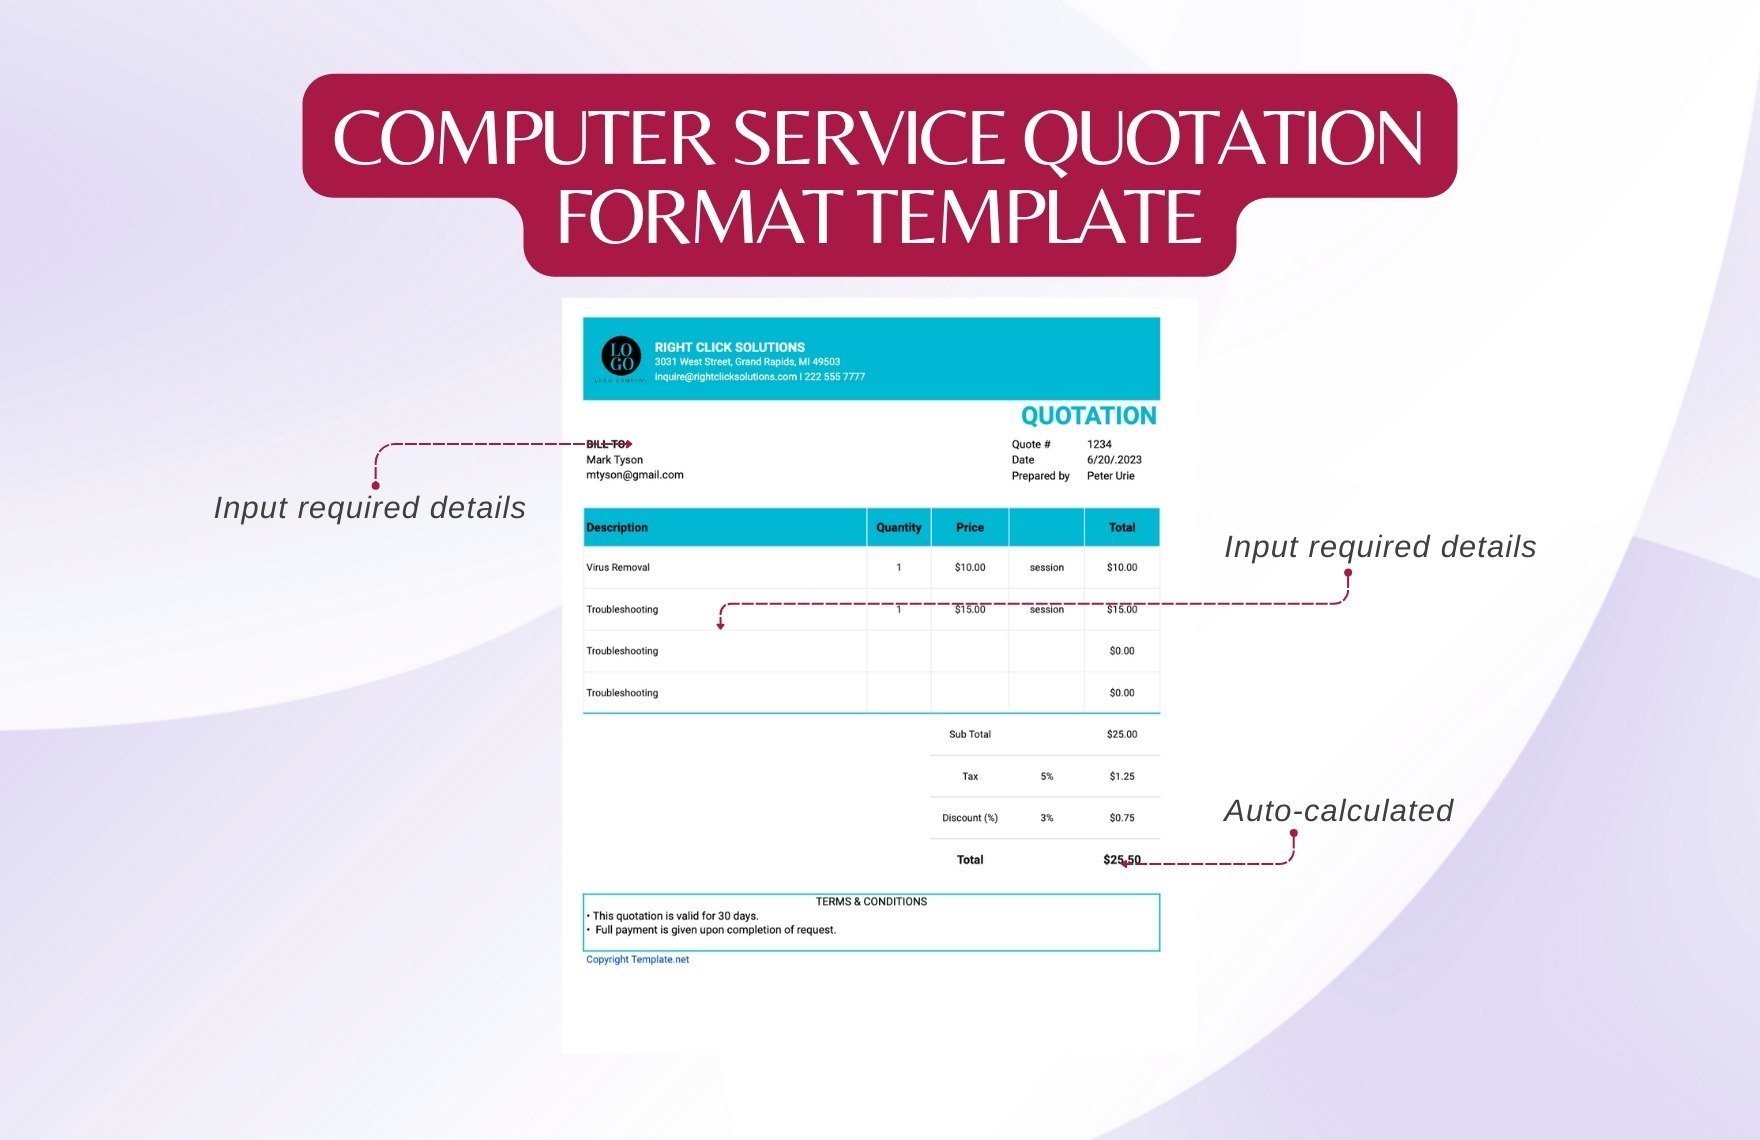 Computer Service Quotation Format Template